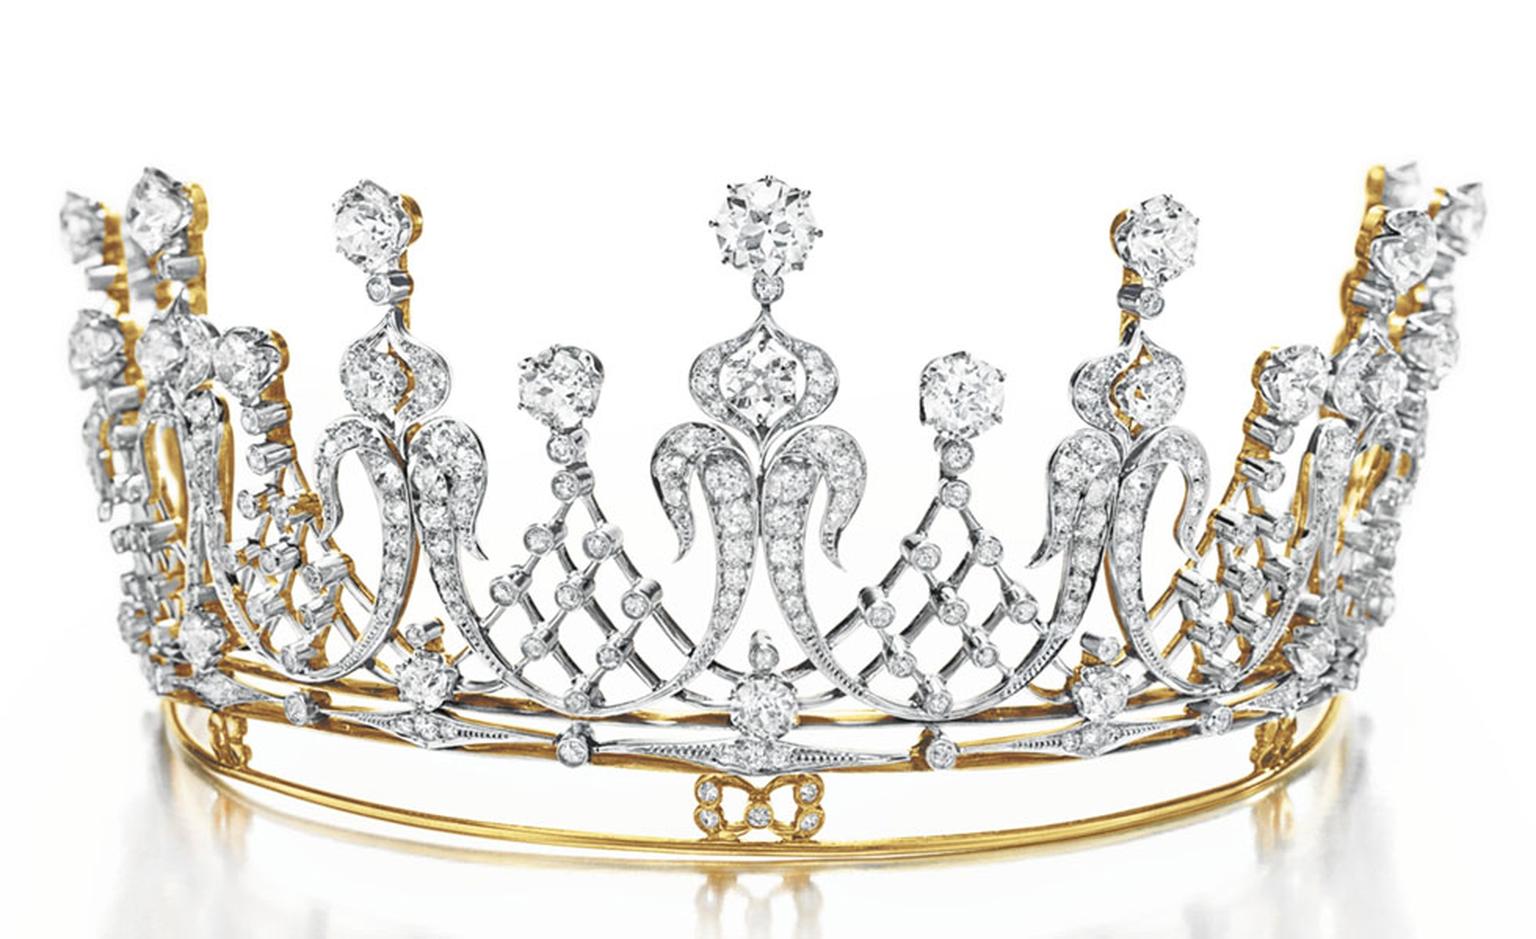 The Mike Todd Diamond Tiara. An Antique Diamond Tiara, circa 1880 Gift from Mike Todd, 1957. He presented her with this antique diamond tiara, saying, “You are my queen.” She wore it to the Academy Awards in Los Angeles in 1957, where Todd’s fil...